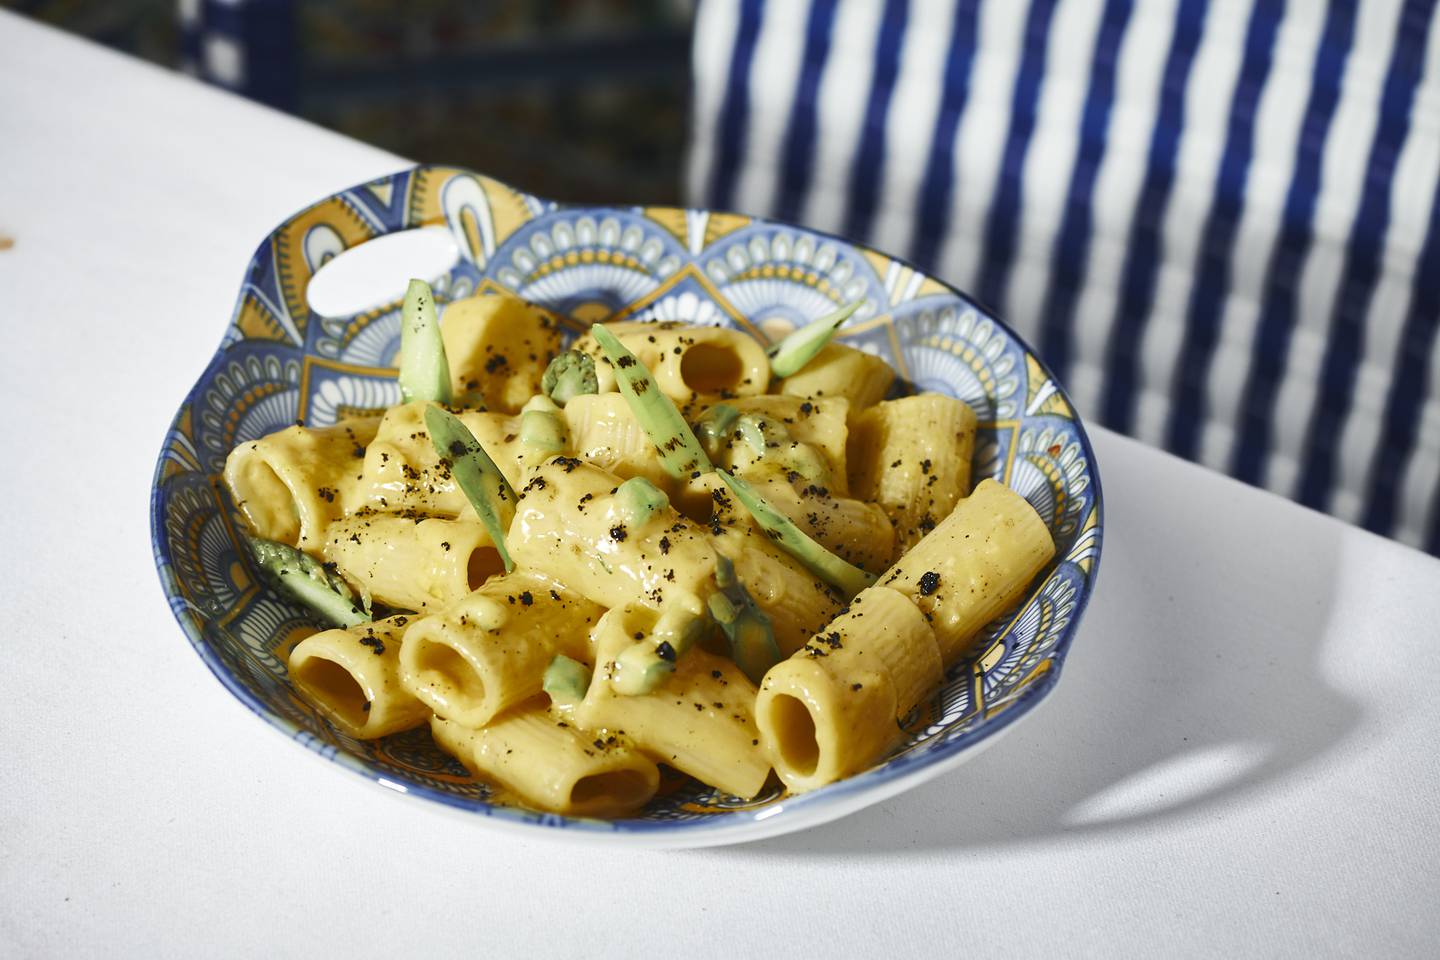 Pasta is the order of the day at this Italian restaurant. Photo: Lucia's